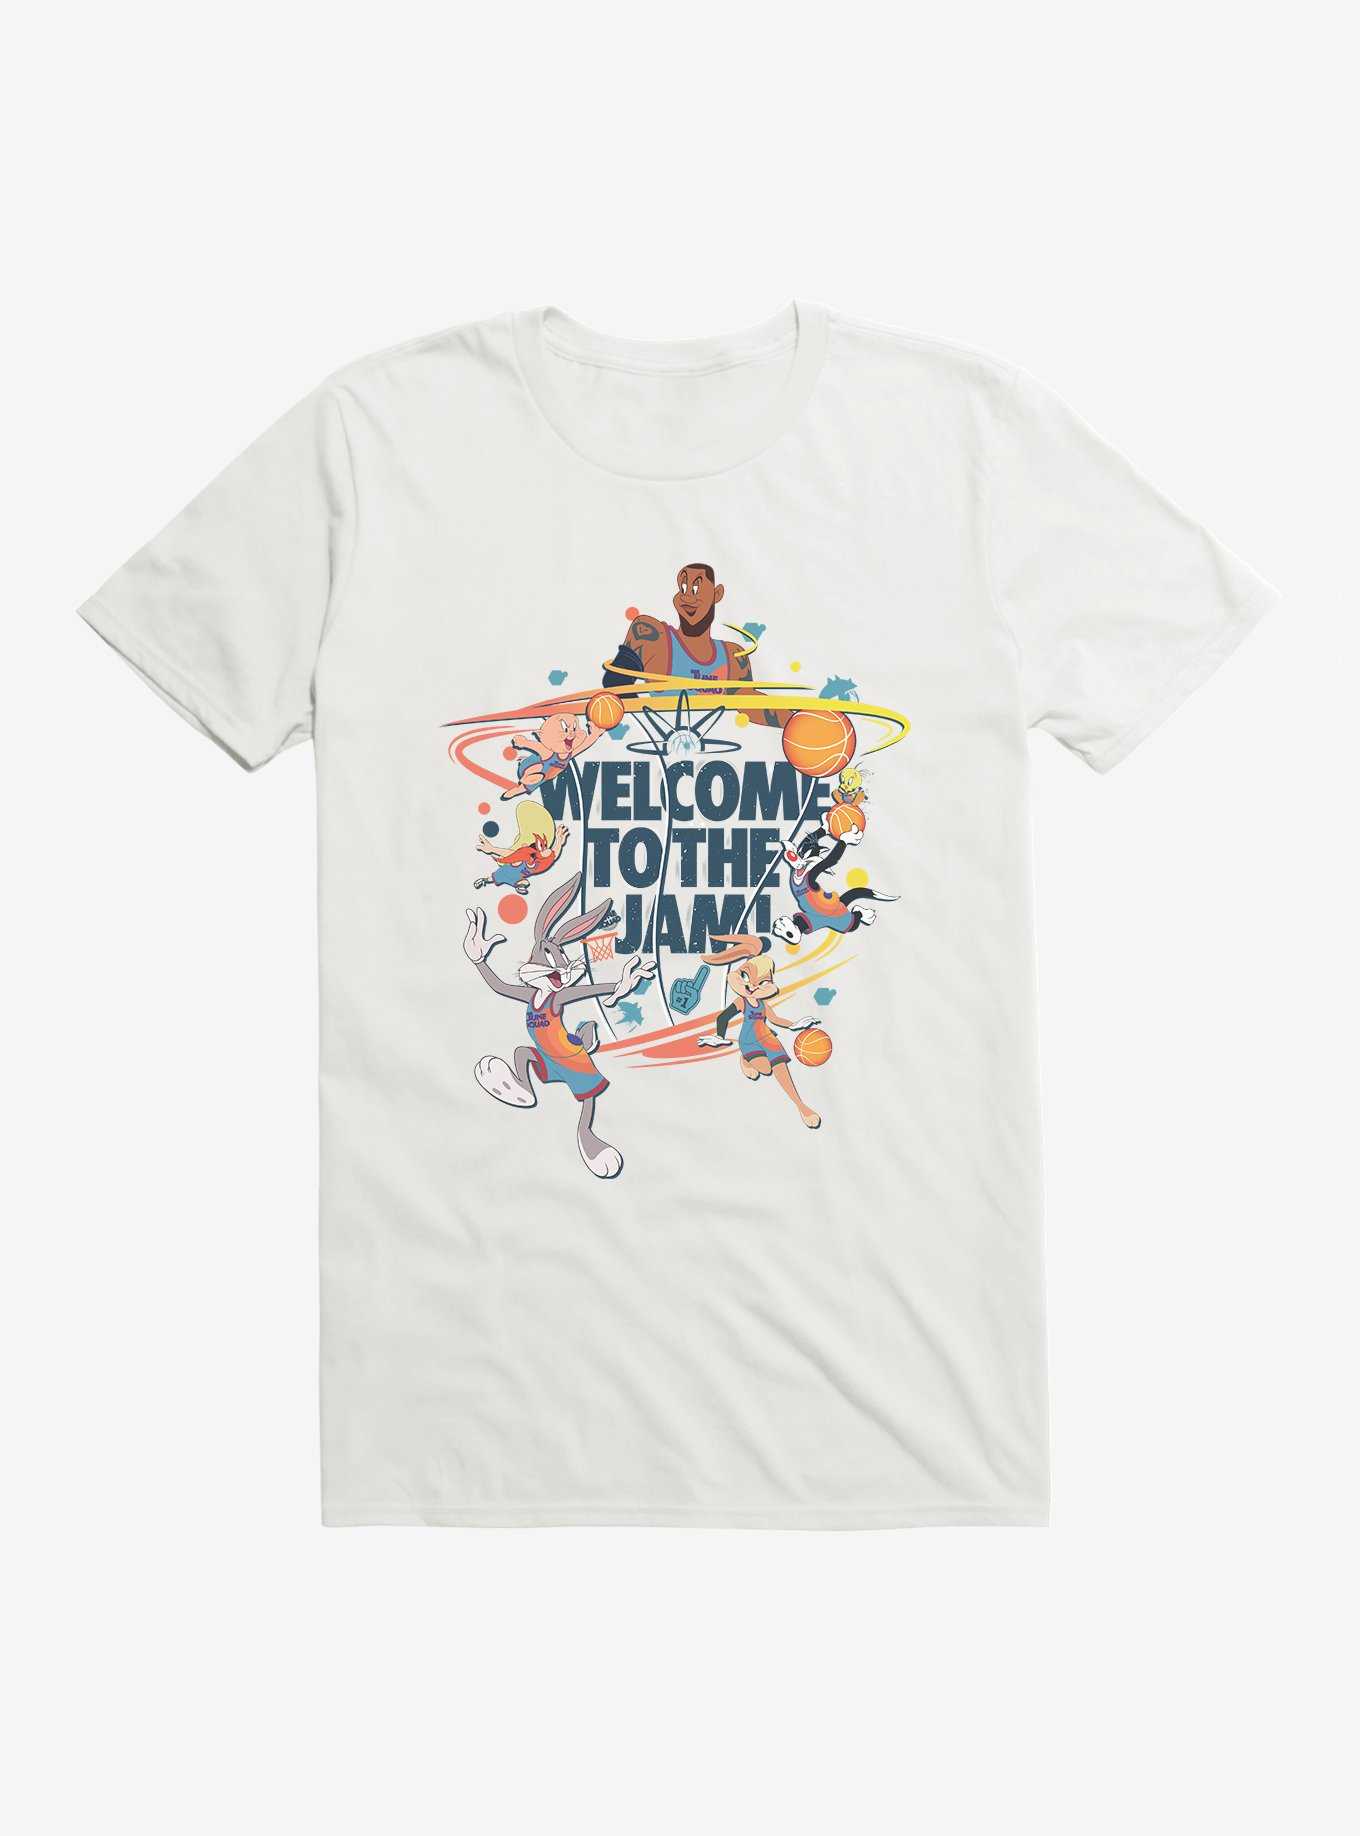 Space Jam: A New Legacy LeBron And Tune Squad Welcome To The Jam! T-Shirt, WHITE, hi-res